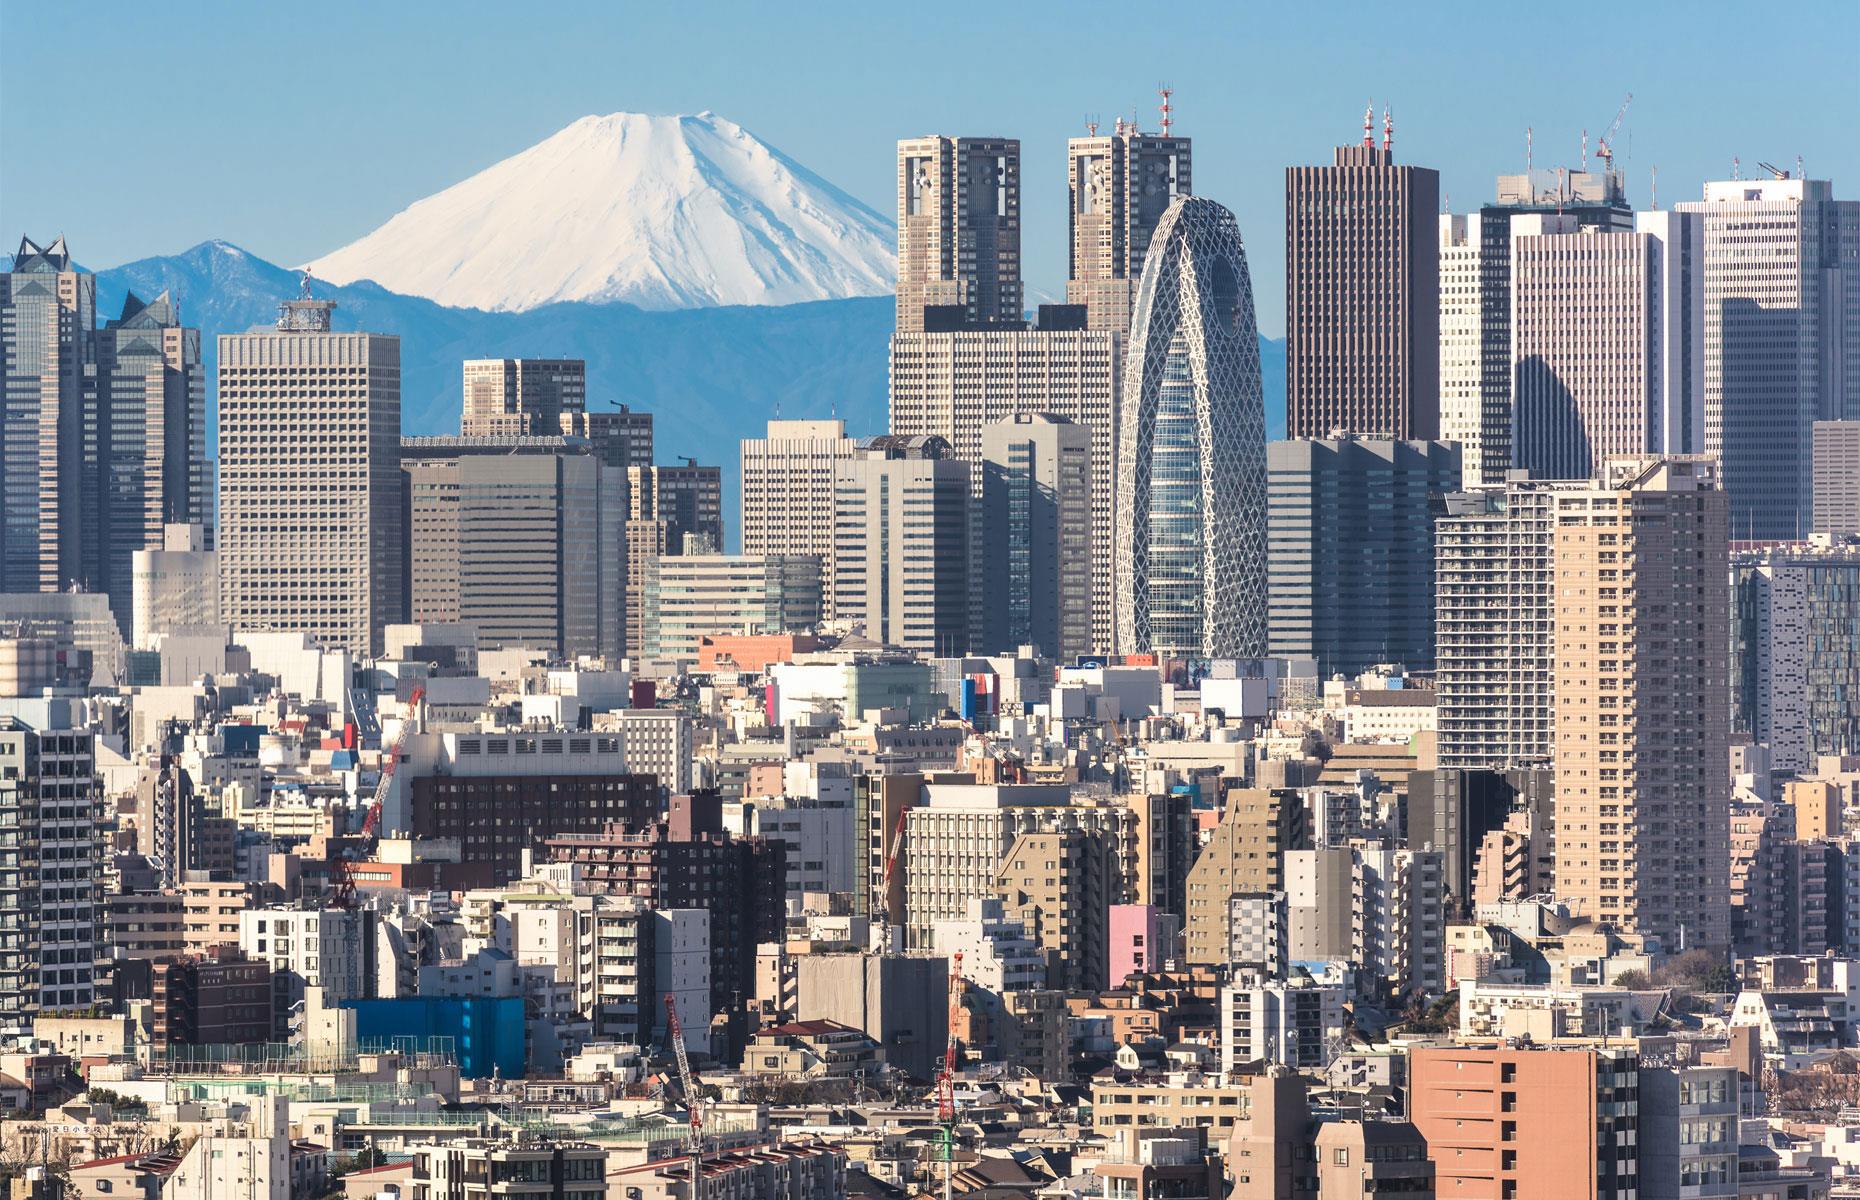 1st. Japan – 237.7% debt-to-GDP ratio